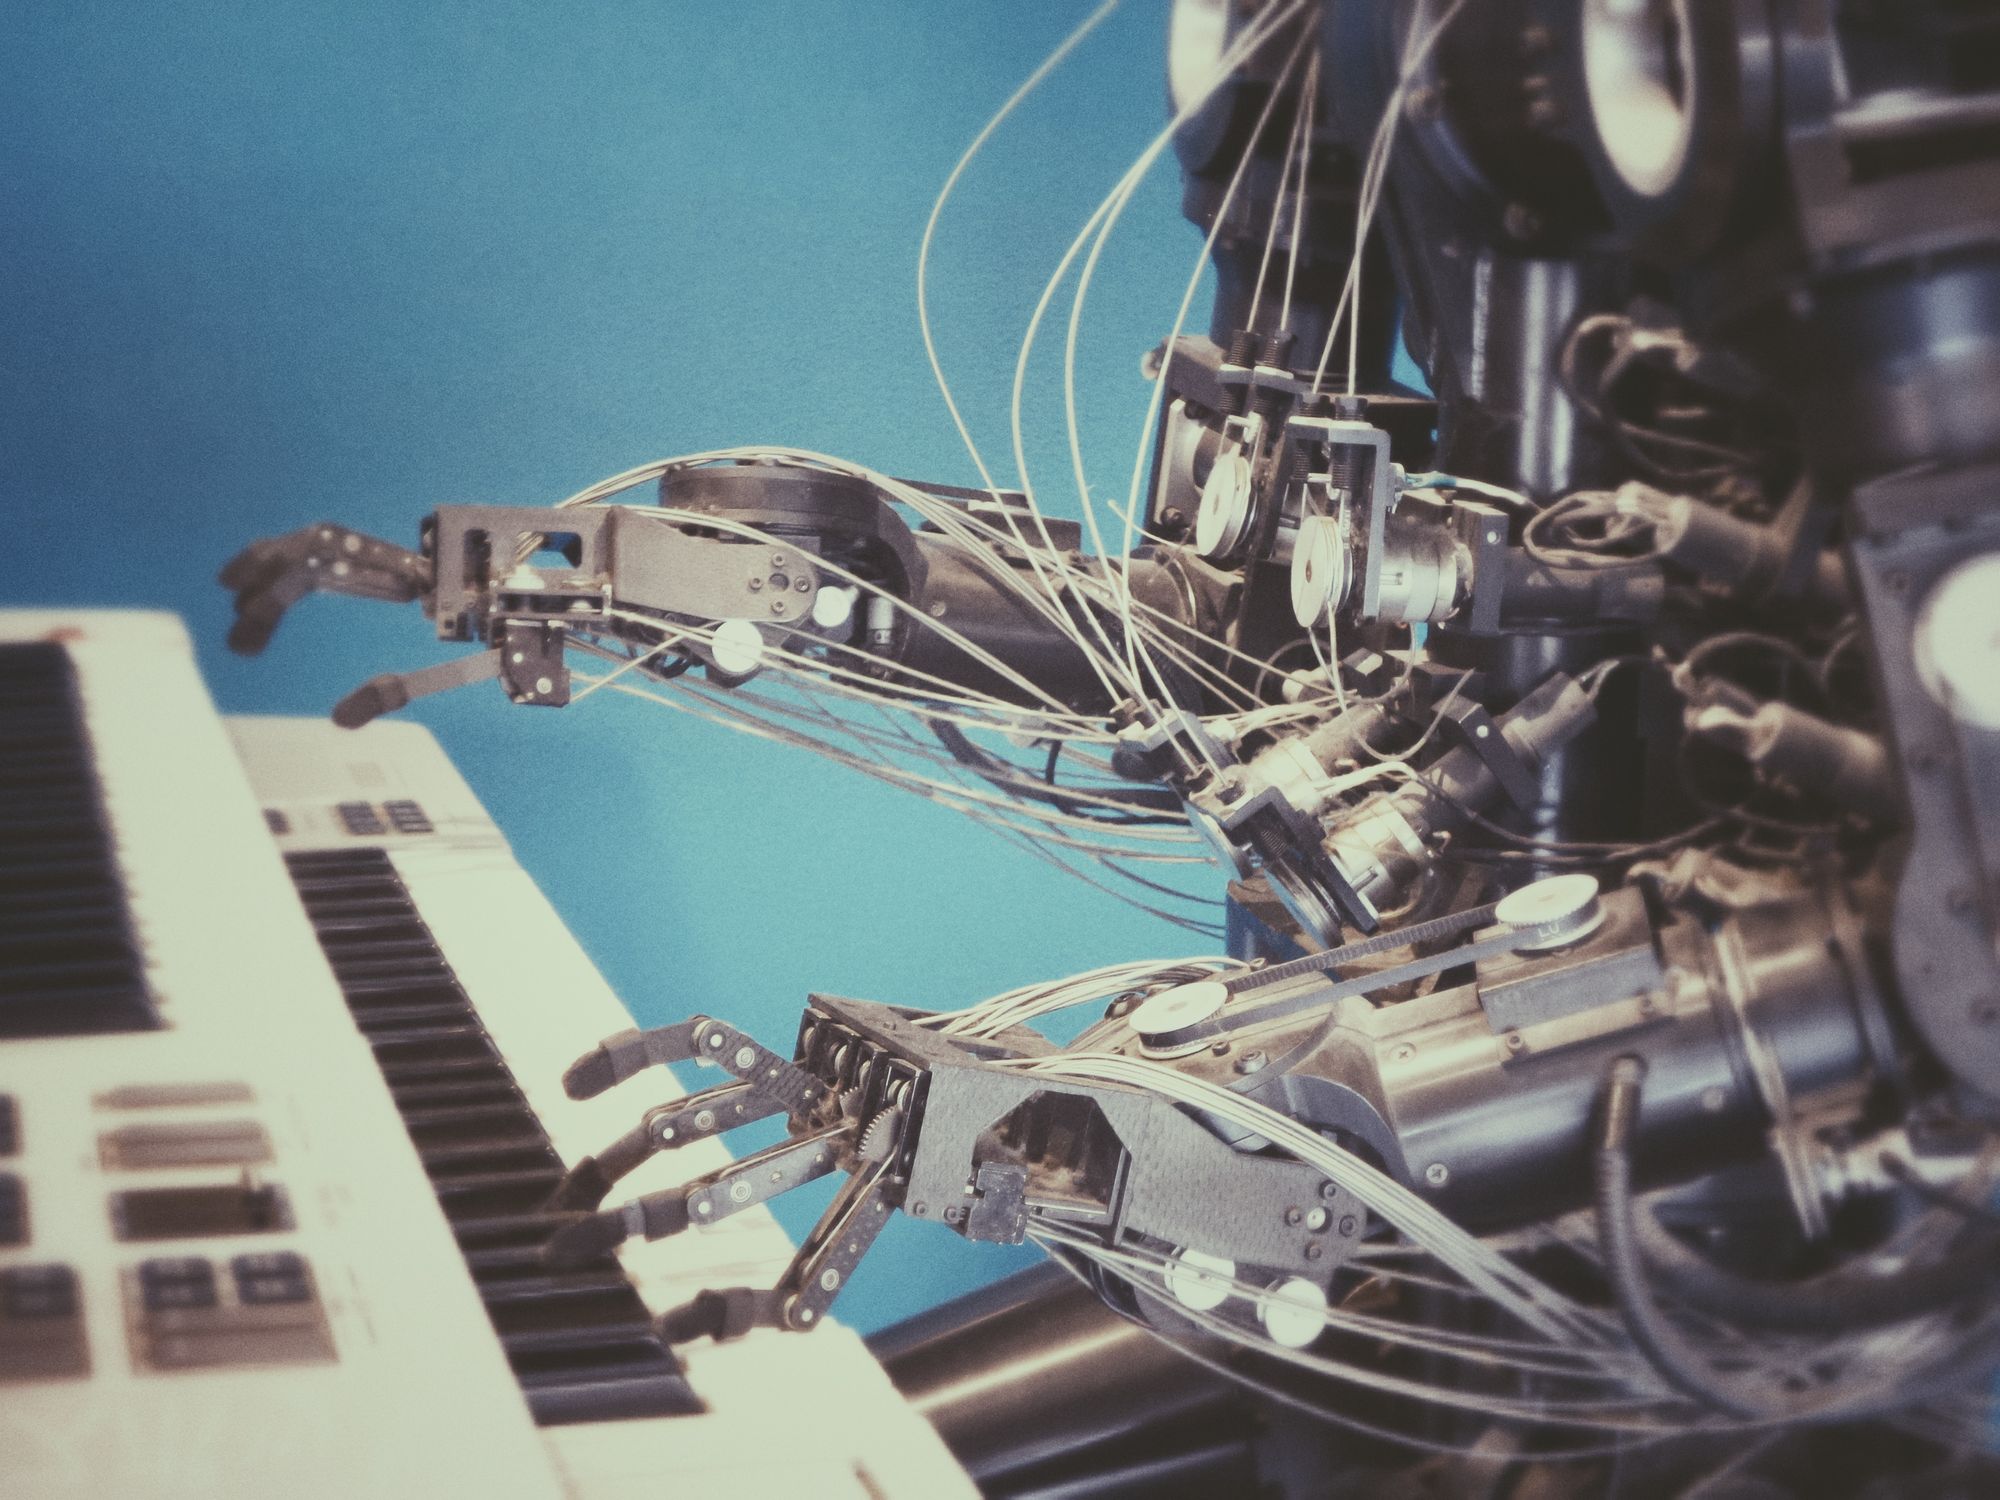 A robot plays a keyboard piano signifying artificial intelligence